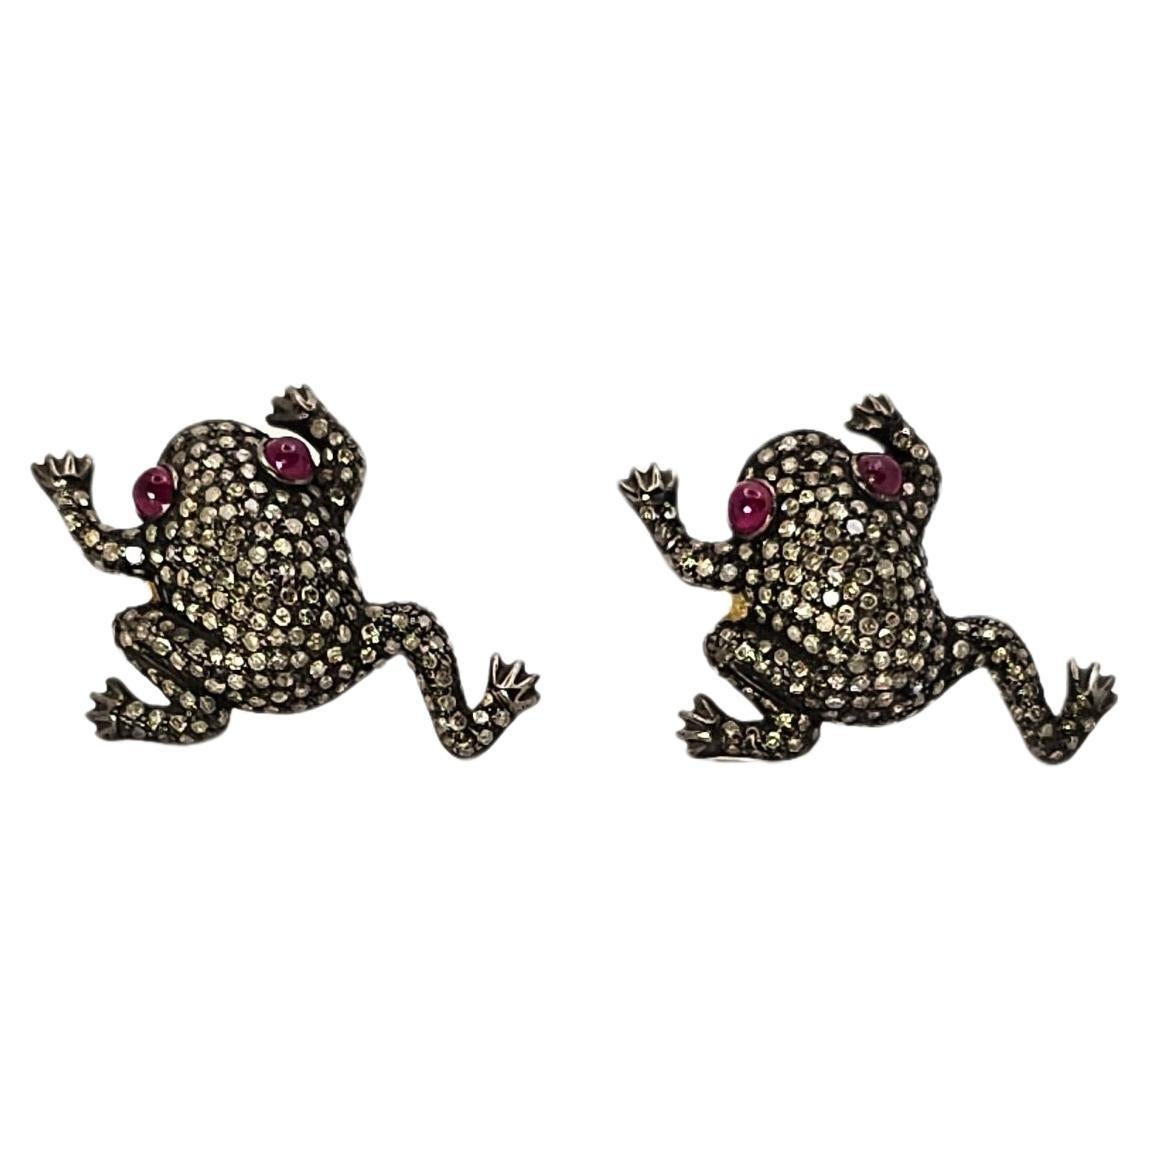 Frog Earrings with Diamonds and Rubies in Silver and Gold For Sale